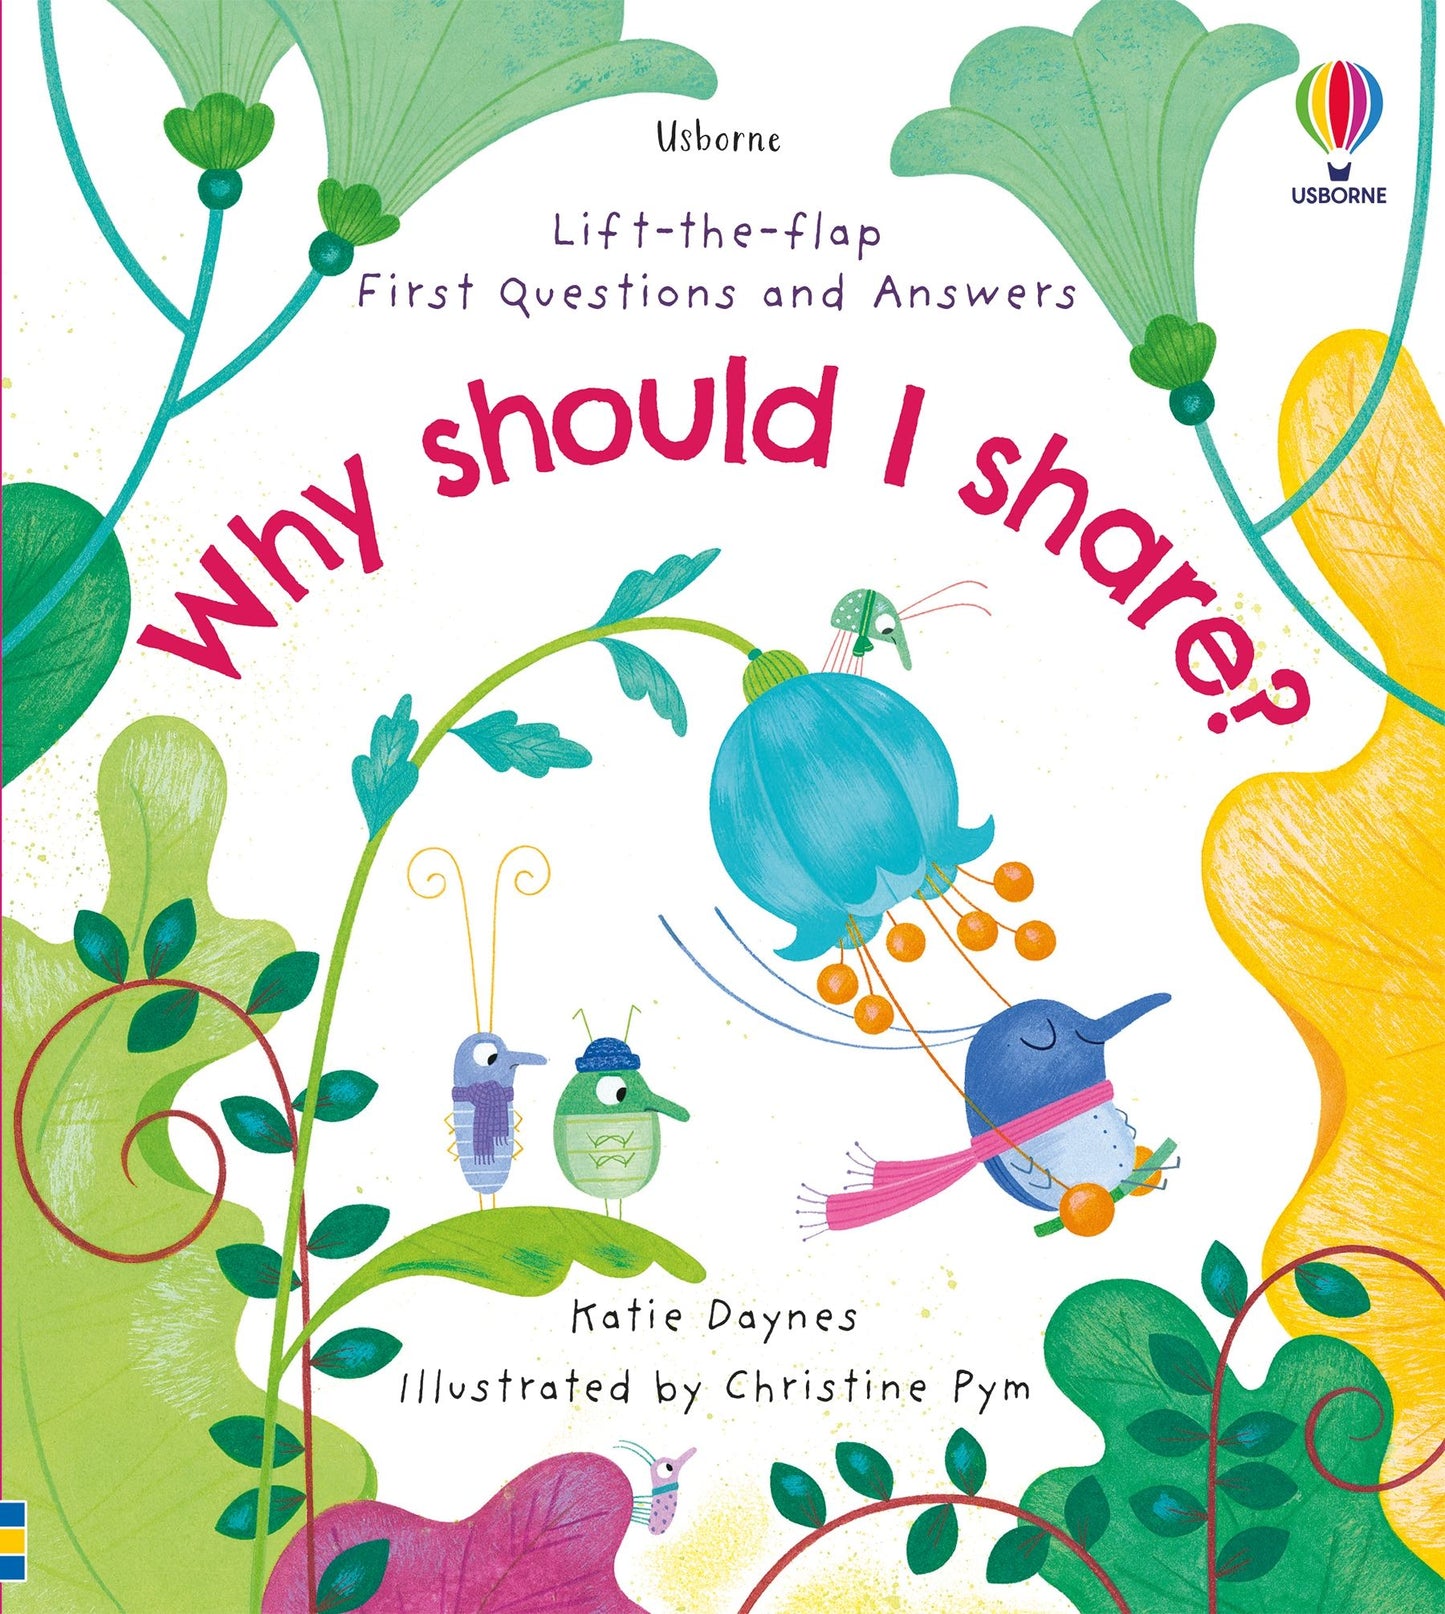 Usborne First Questions and Answers: Why should I share?